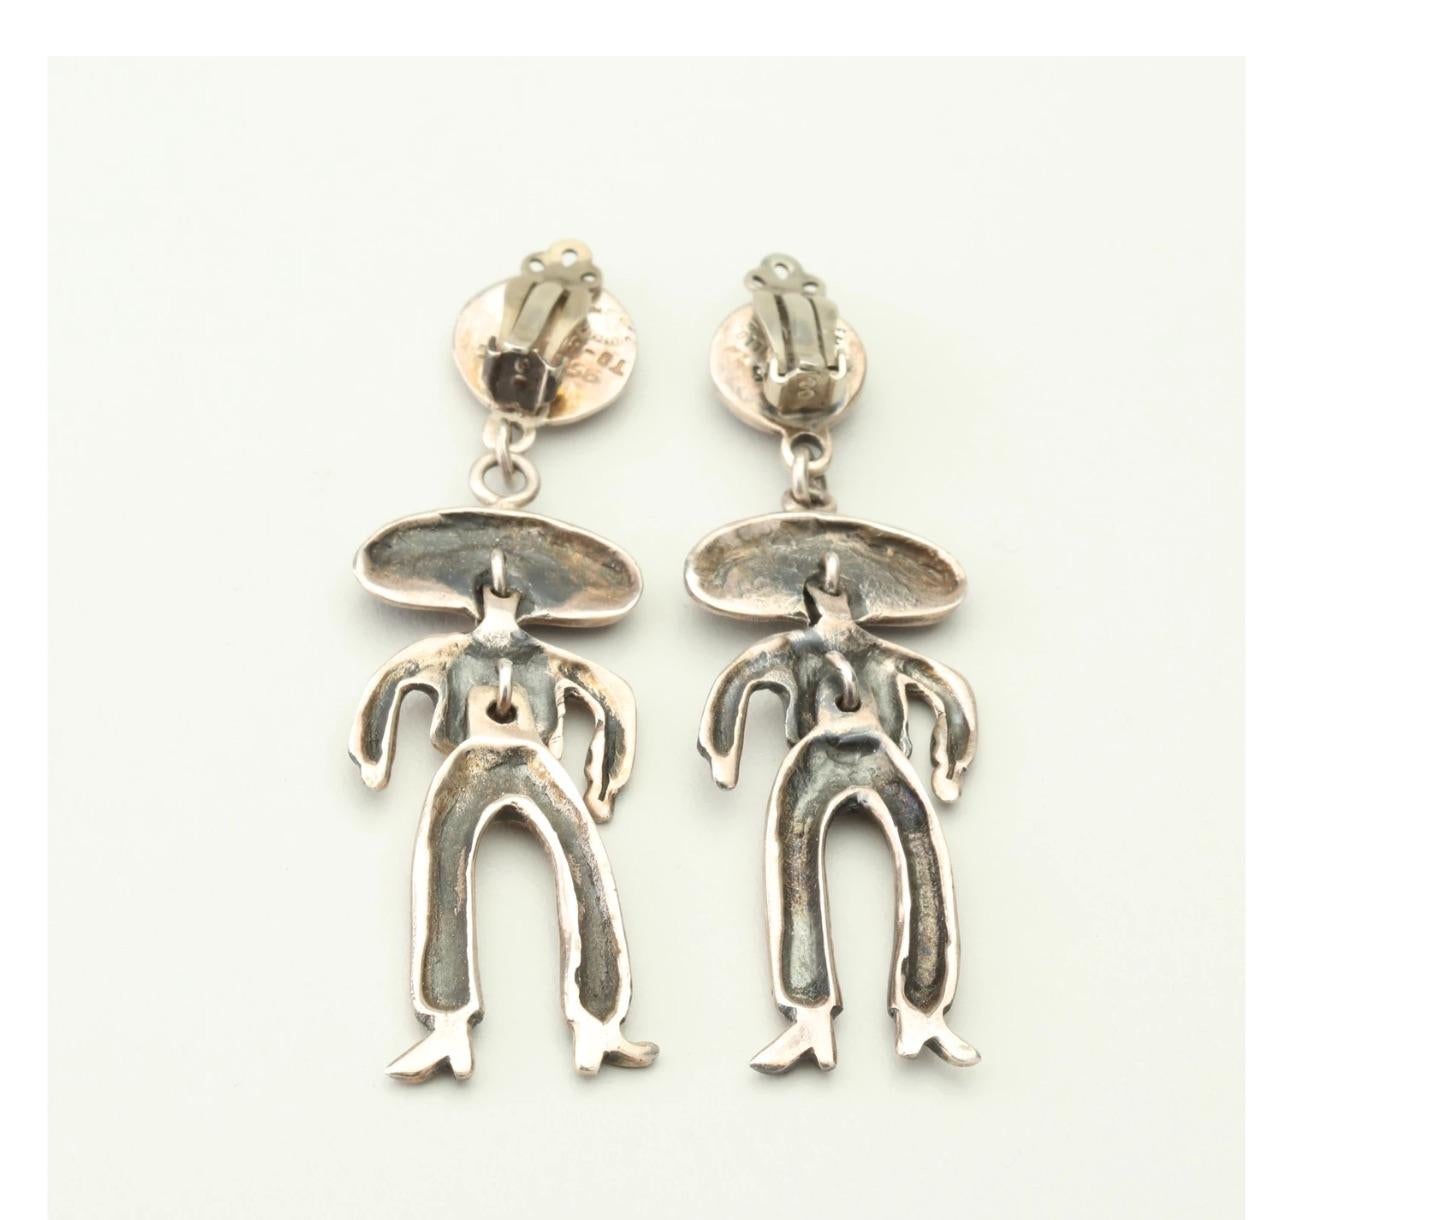 Vintage Mexico Emilia Castillo 950 Silver Dangle Earrings-'Day of Dead Cowboy' In Excellent Condition For Sale In West Palm Beach, FL